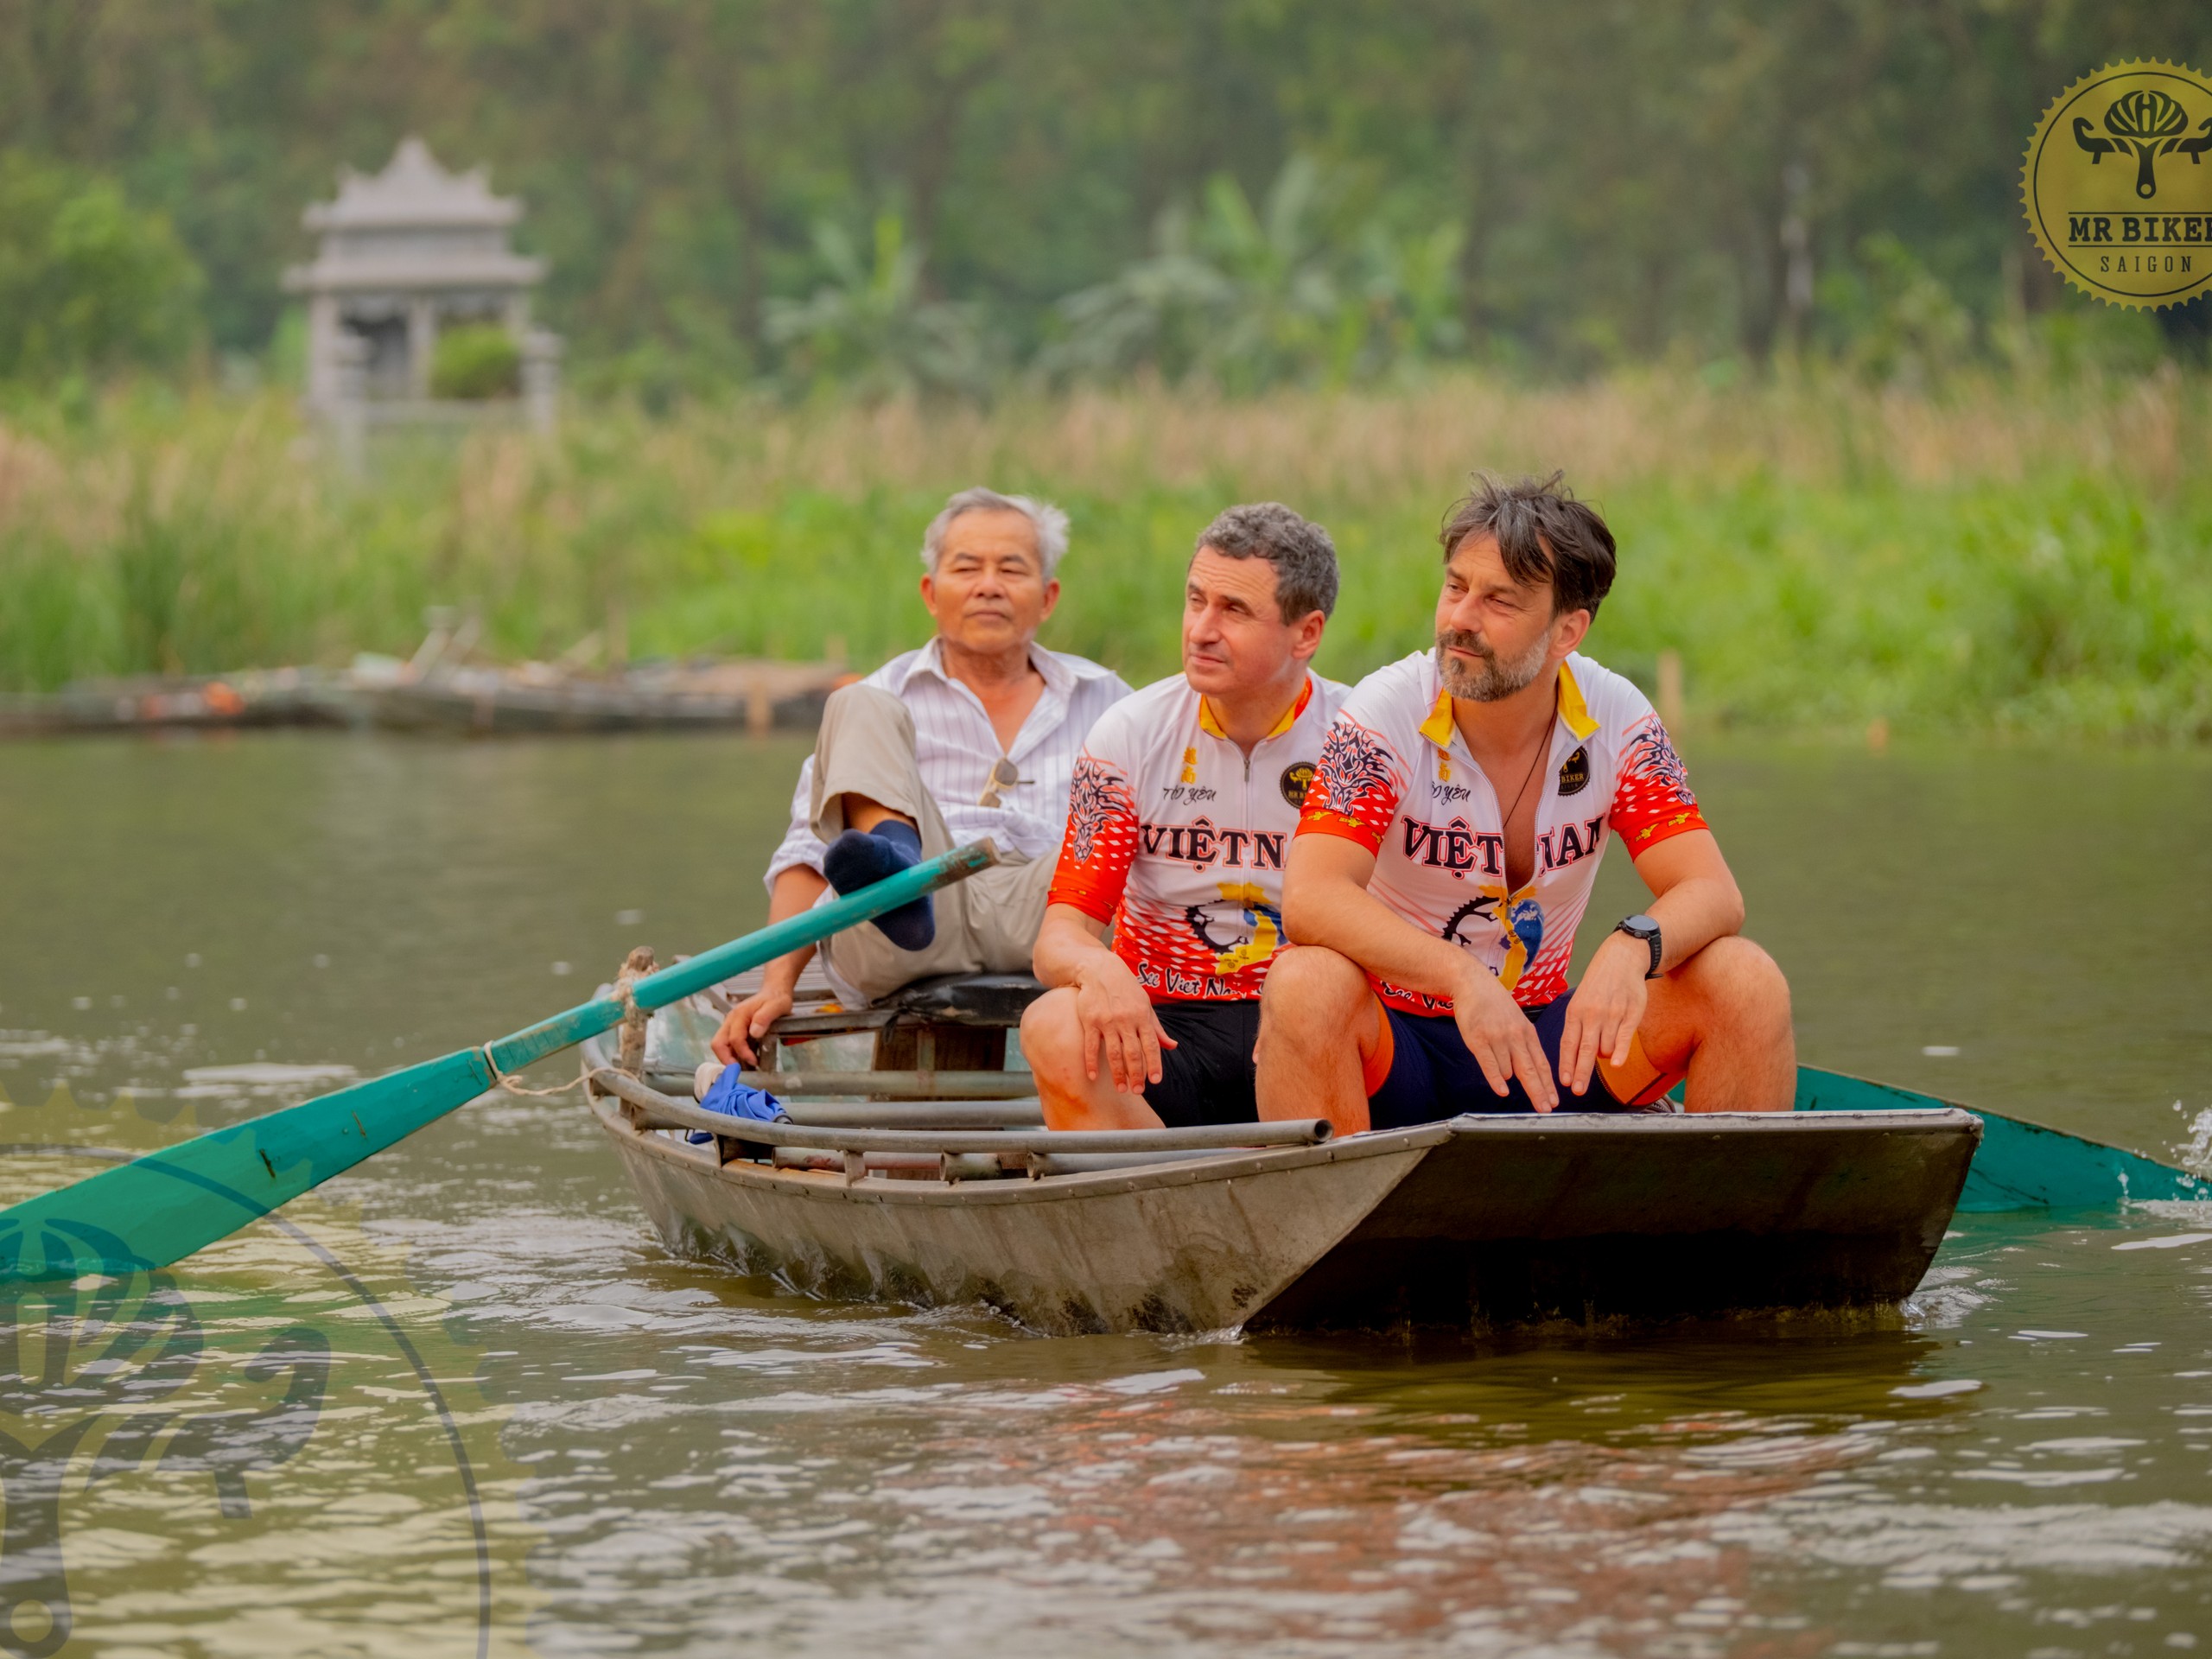 Rowing the boat in Vietnam